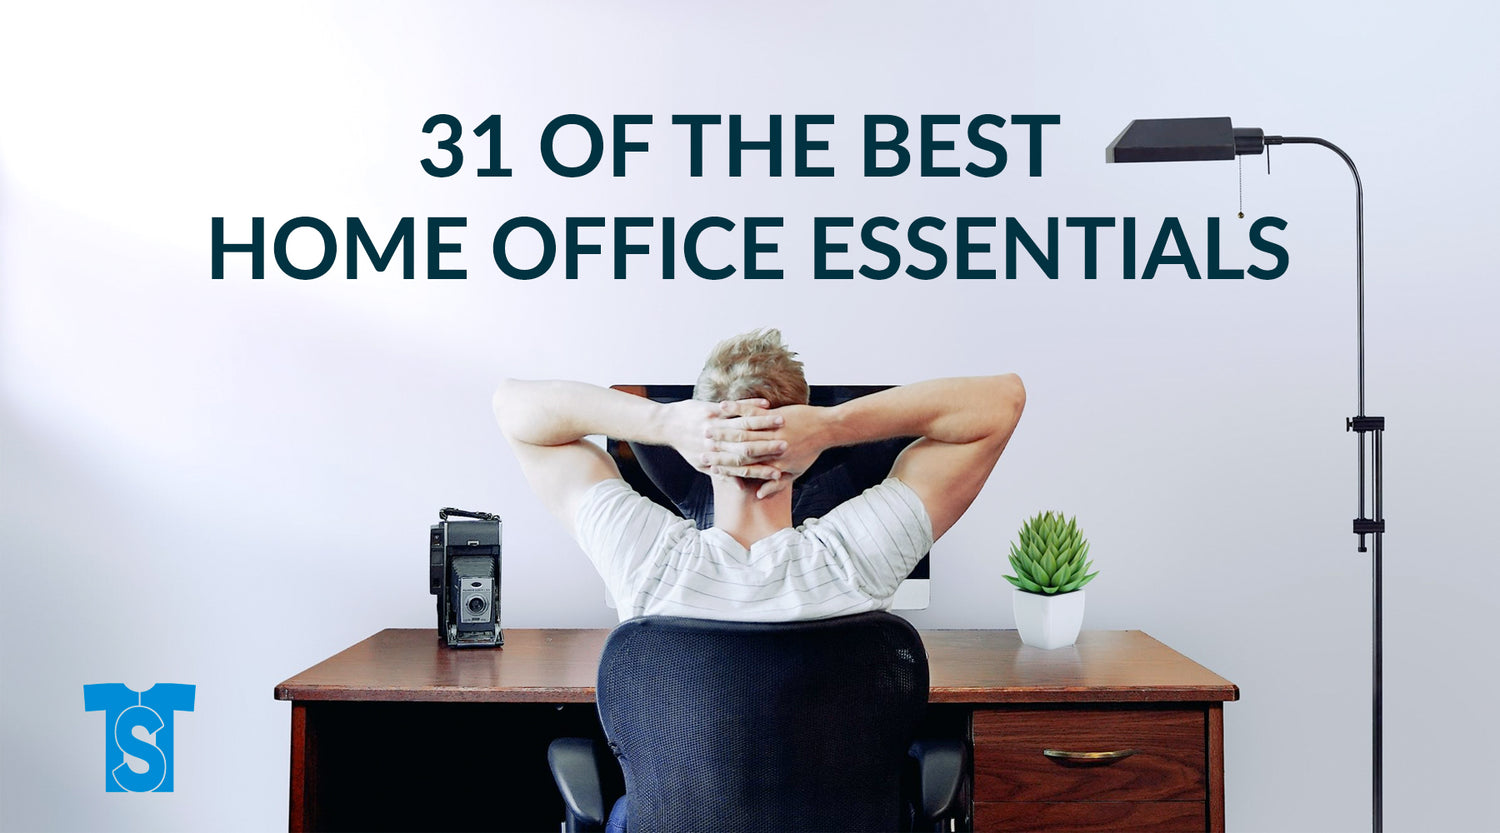 31 of the Best Home Office Essentials You Need for 2022